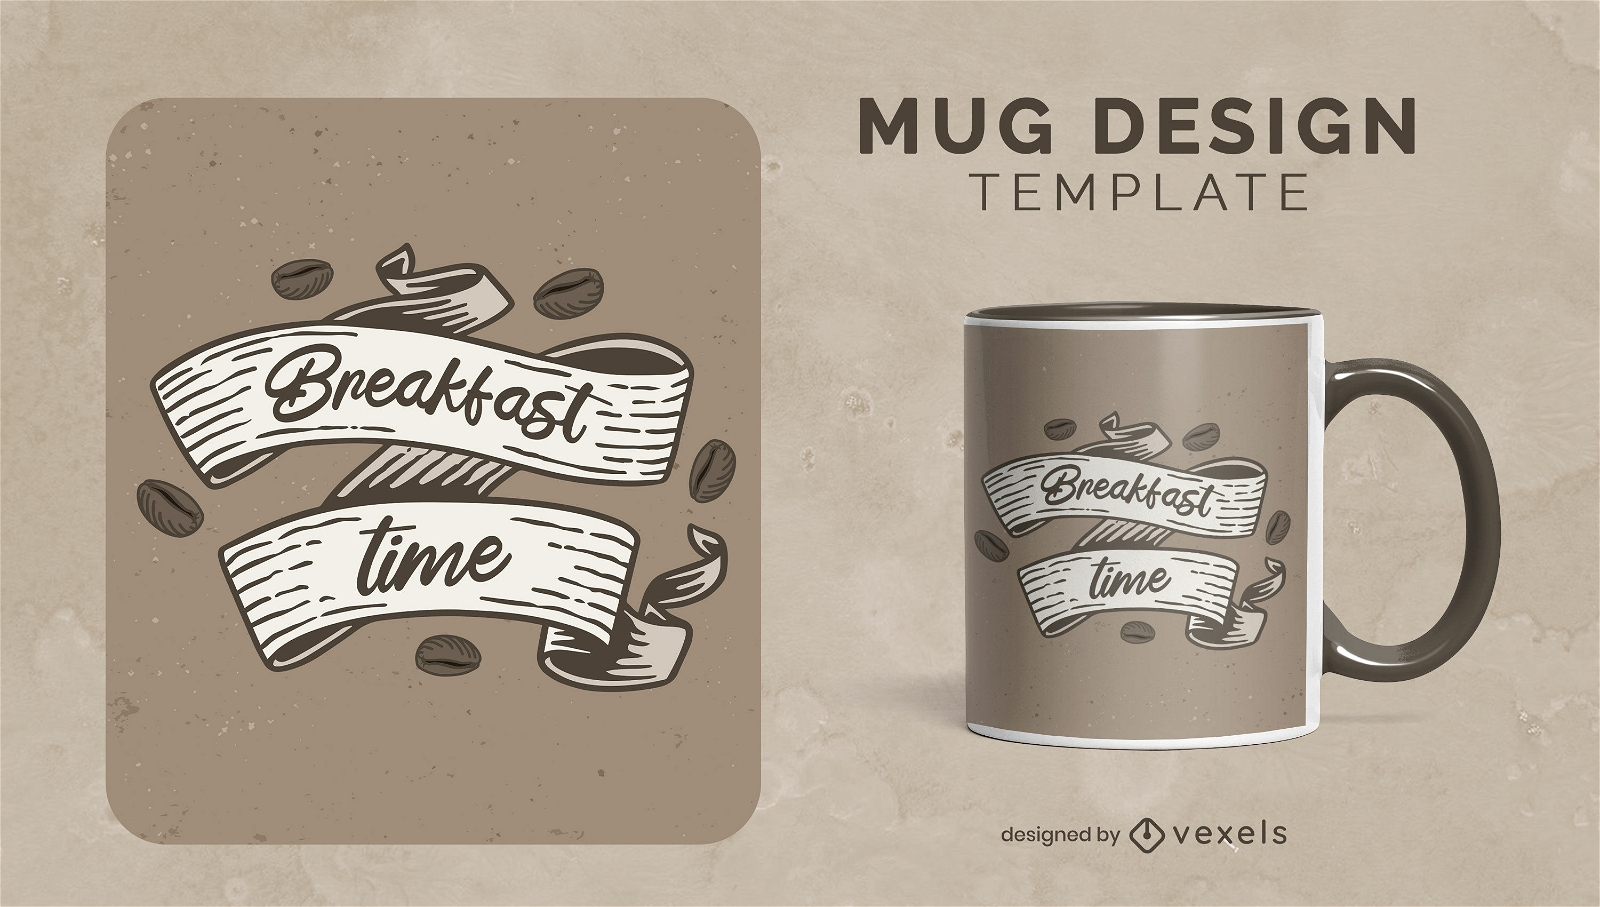 https://images.vexels.com/content/305938/preview/breakfast-time-quote-mug-design-4d9a25.png